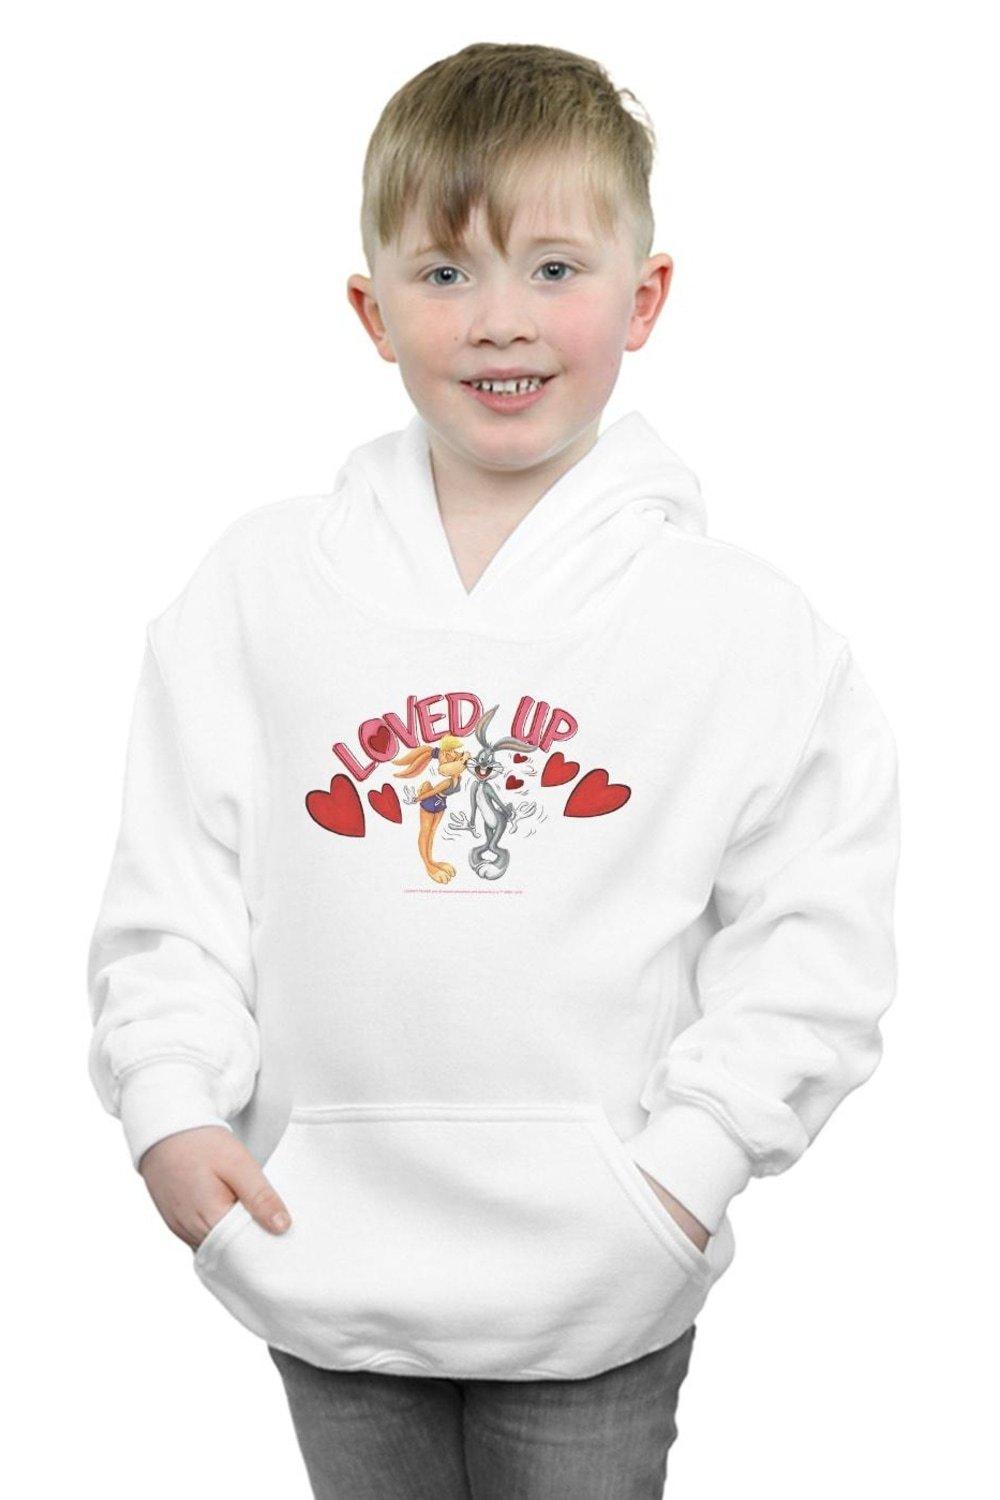 Bugs Bunny And Lola Valentine’s Day Loved Up Hoodie